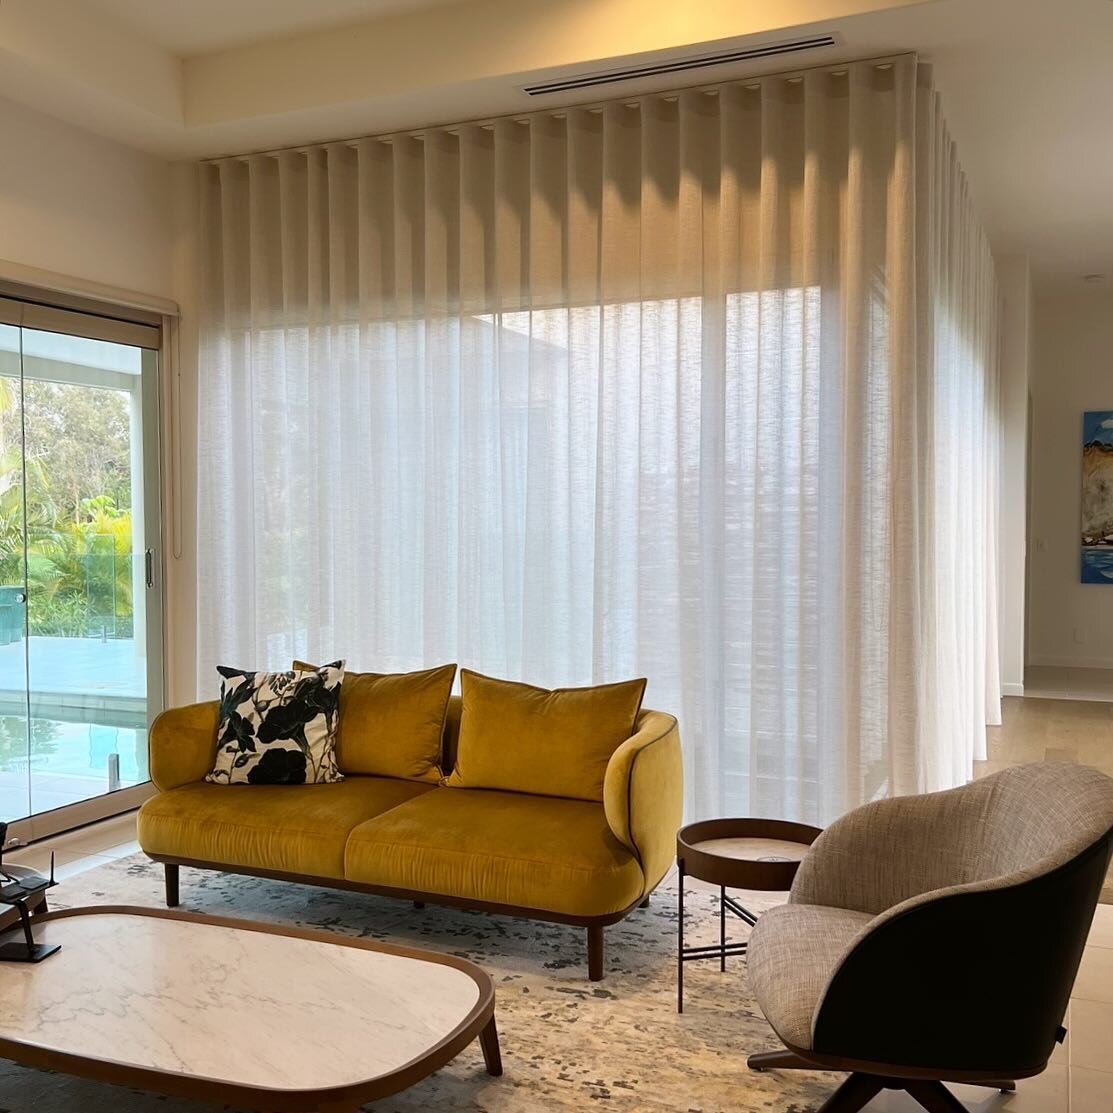 Sheer Wave Curtains hung on custom powder coated Silent Gliss 6840 Tracks with top fix hidden fasteners on one side and face fitted with square smart fix brackets on the other side for a very sleek finish 🤍✨

Fabric @unique_fabrics Stellar colour Ta